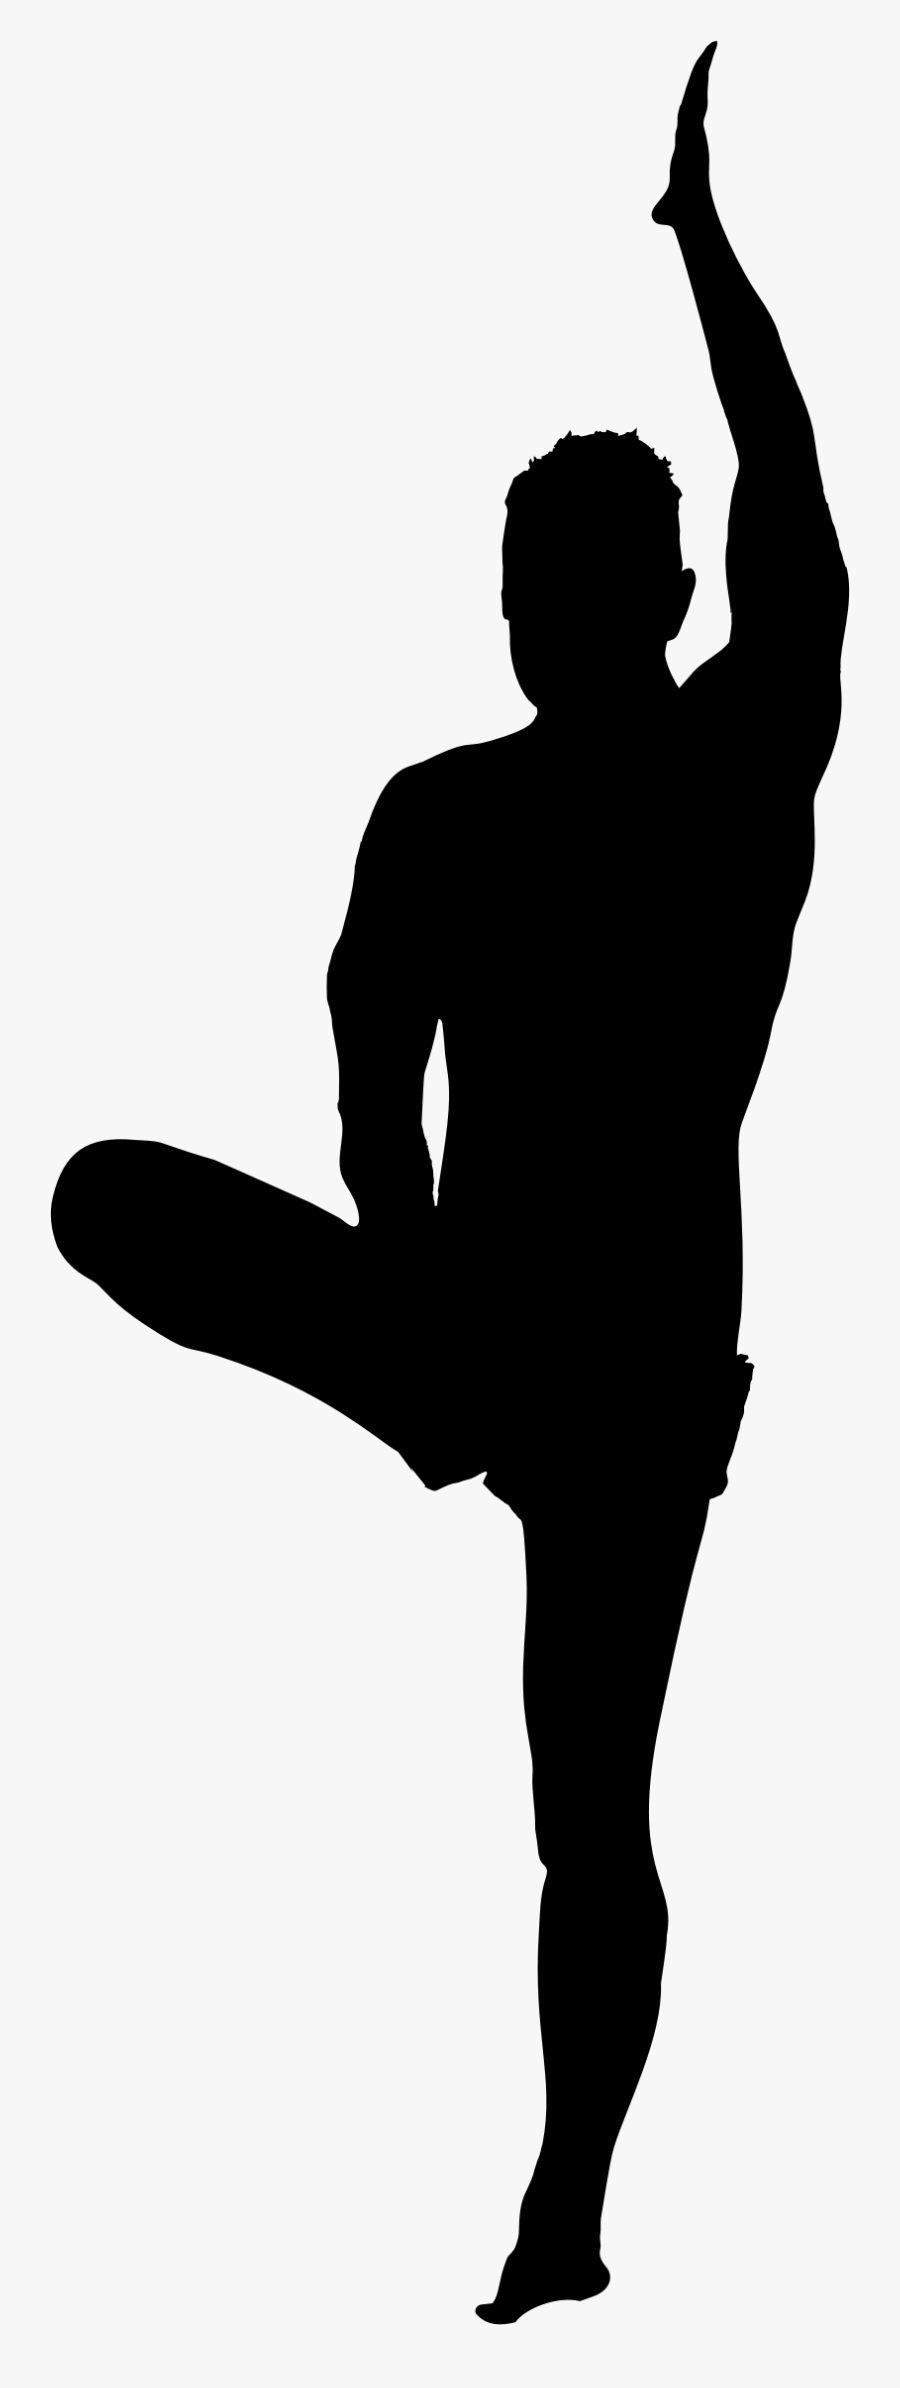 Male Pose Silhouette Icons - People Yoga Silhouette Png, Transparent Clipart